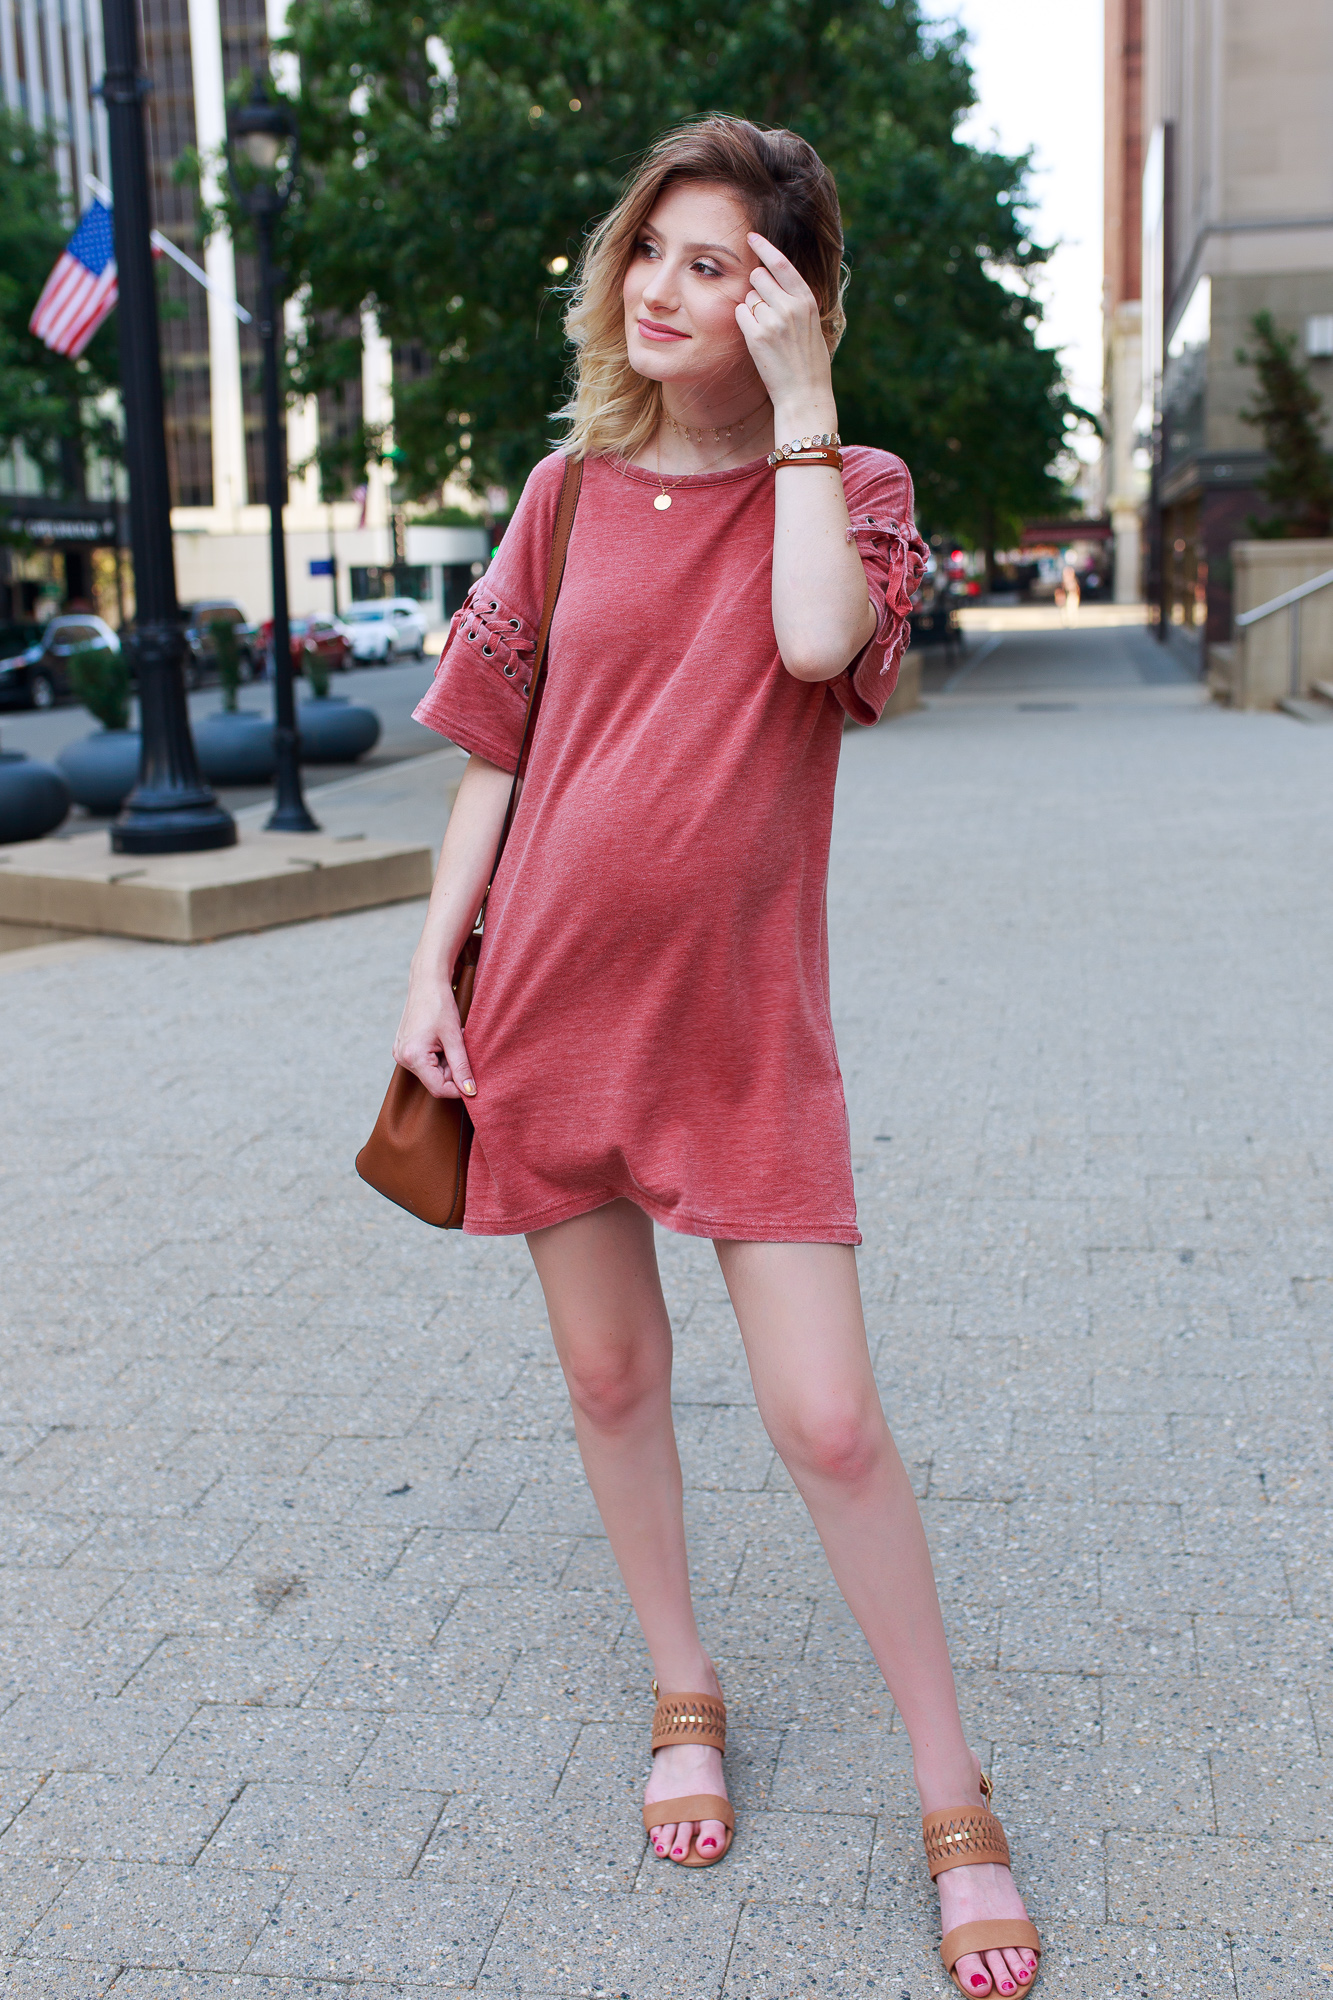 Lifestyle Fashion and beauty blogger Jessica Linn from Linn Style wearing a Forever21 sweater dress and Michael Kors purse in downtown Raleigh North Carolina. Non-maternity maternity outfits.